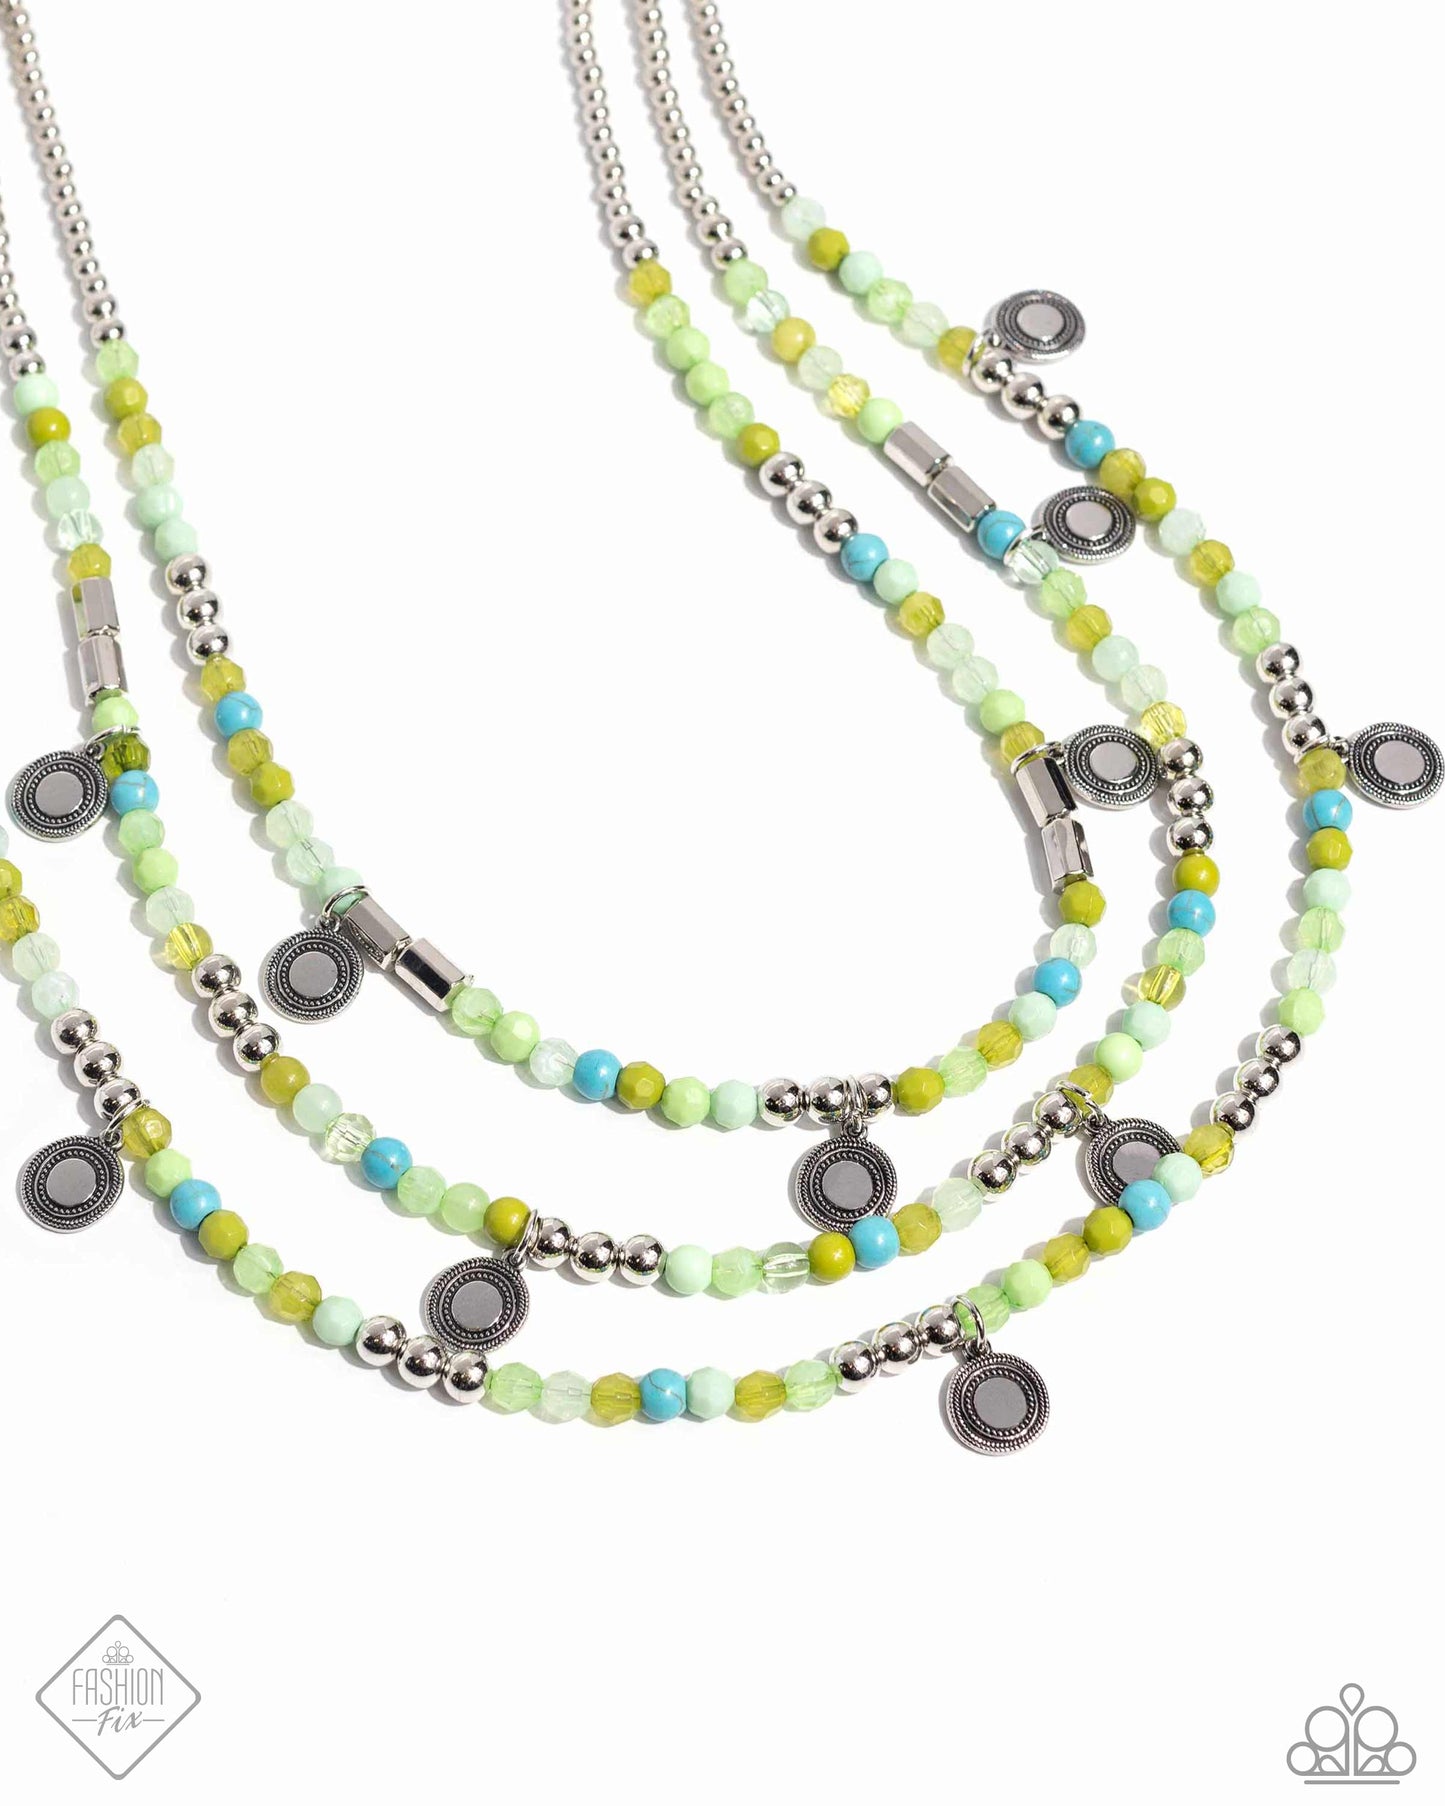 Piquant Pattern - green - Paparazzi necklace